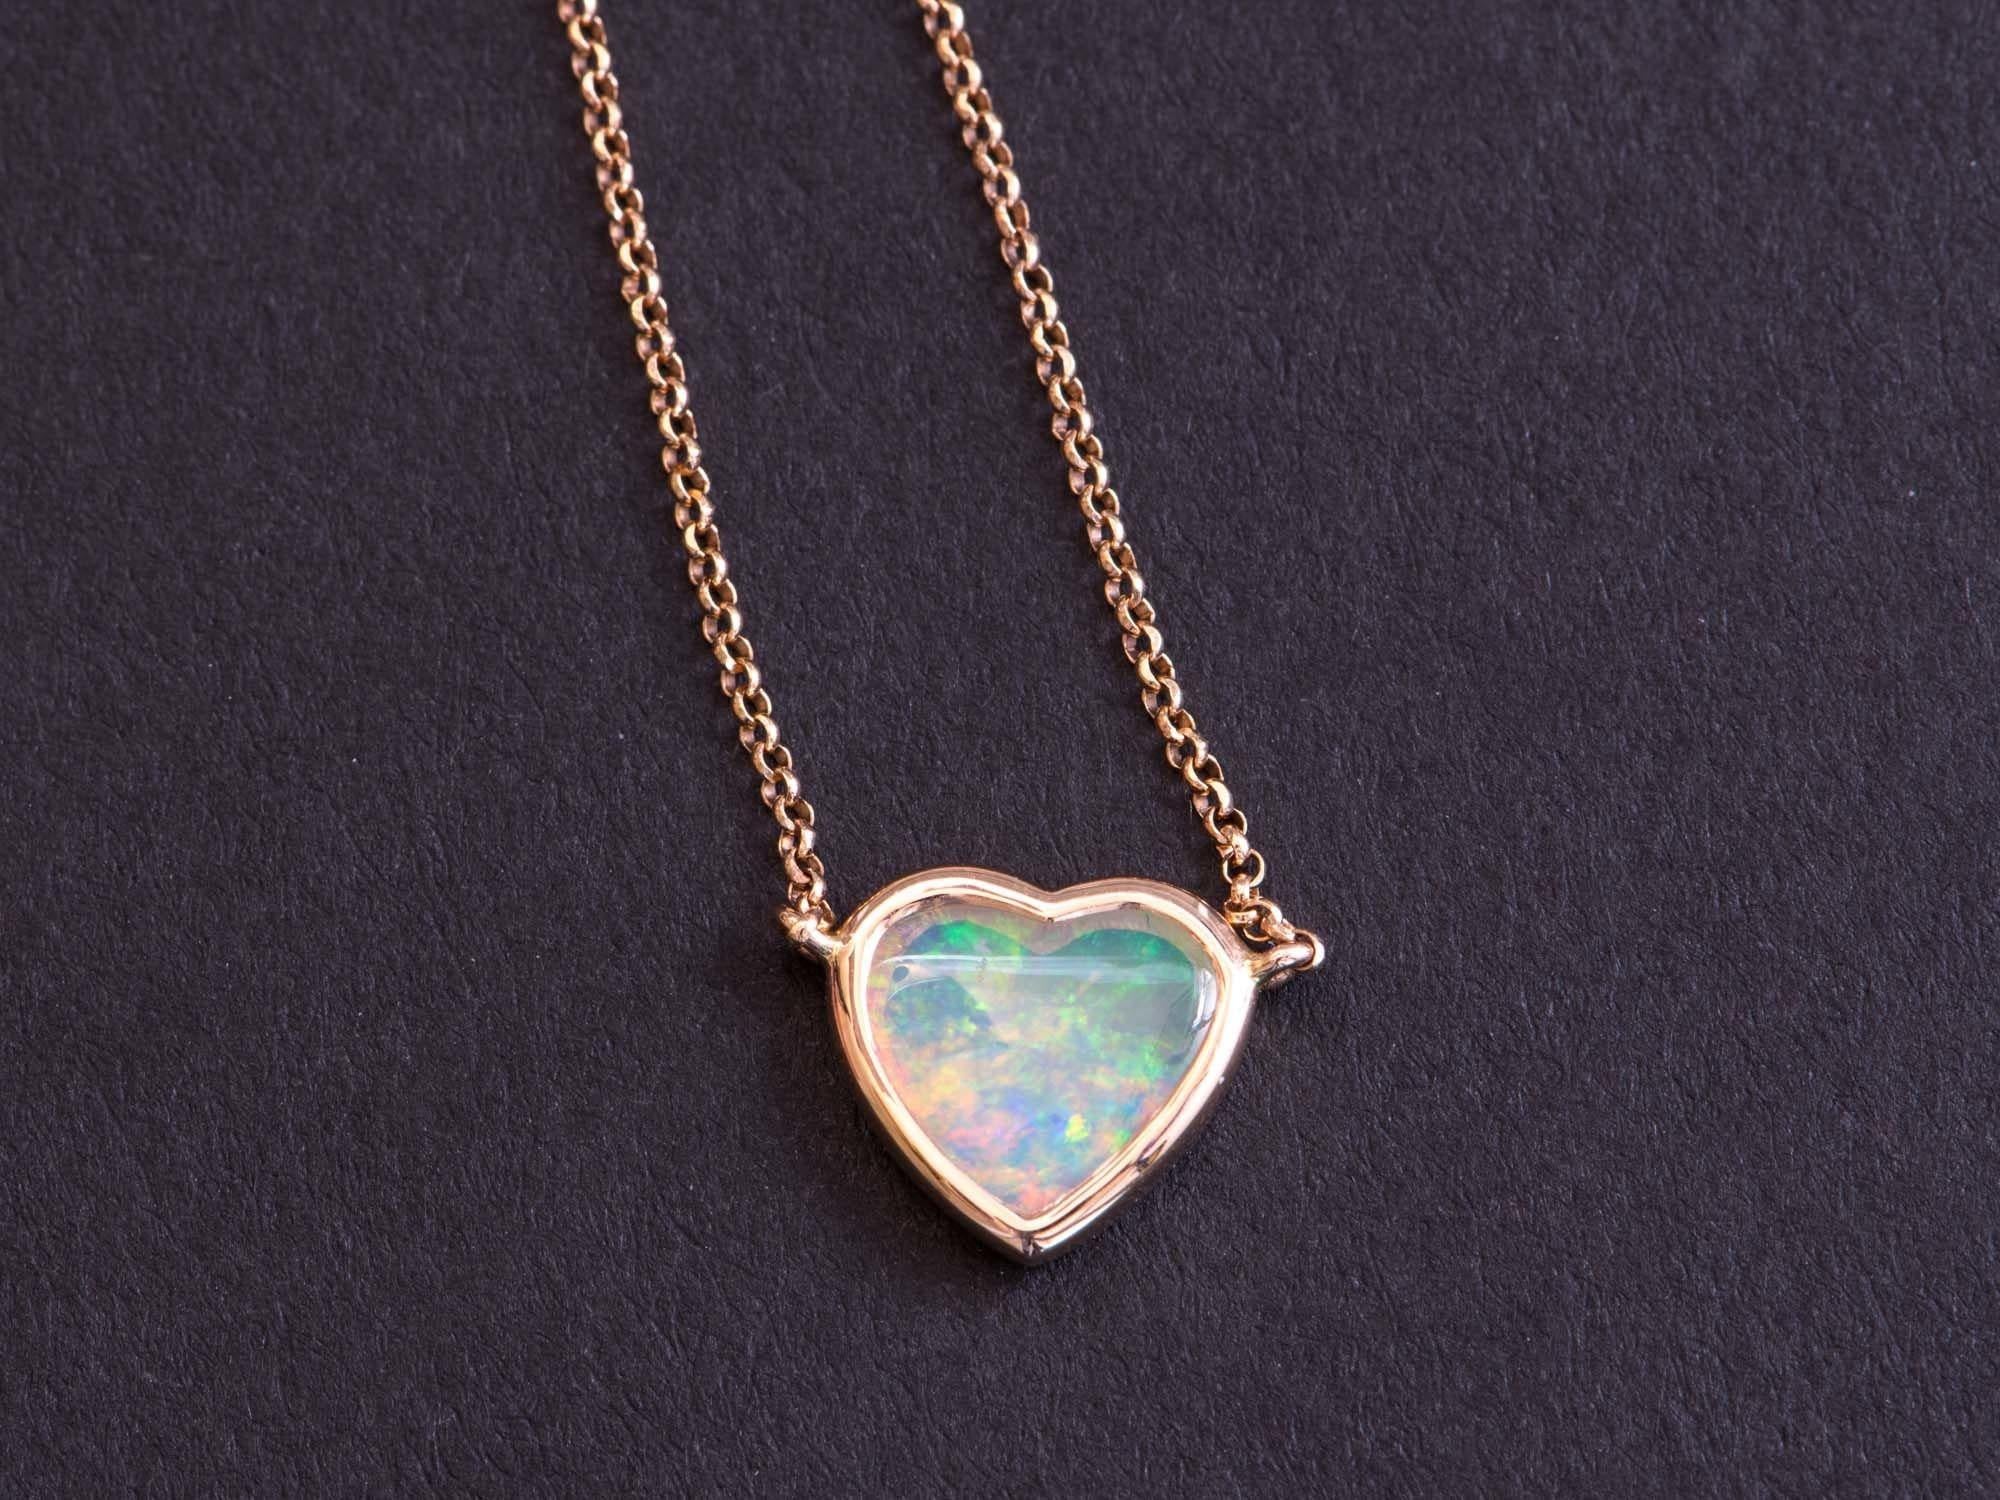 

♥ Heart-shape Solid Australian Crystal Opal Bezel Set Necklace 14K Rose Gold Pendant
♥ Solid 14k rose gold pendant set with a beautiful -shaped
♥ Gorgeous color!
♥ The item measures 10.2 mm in length, 9.7 mm in width, and stands 2.9 mm thick

♥